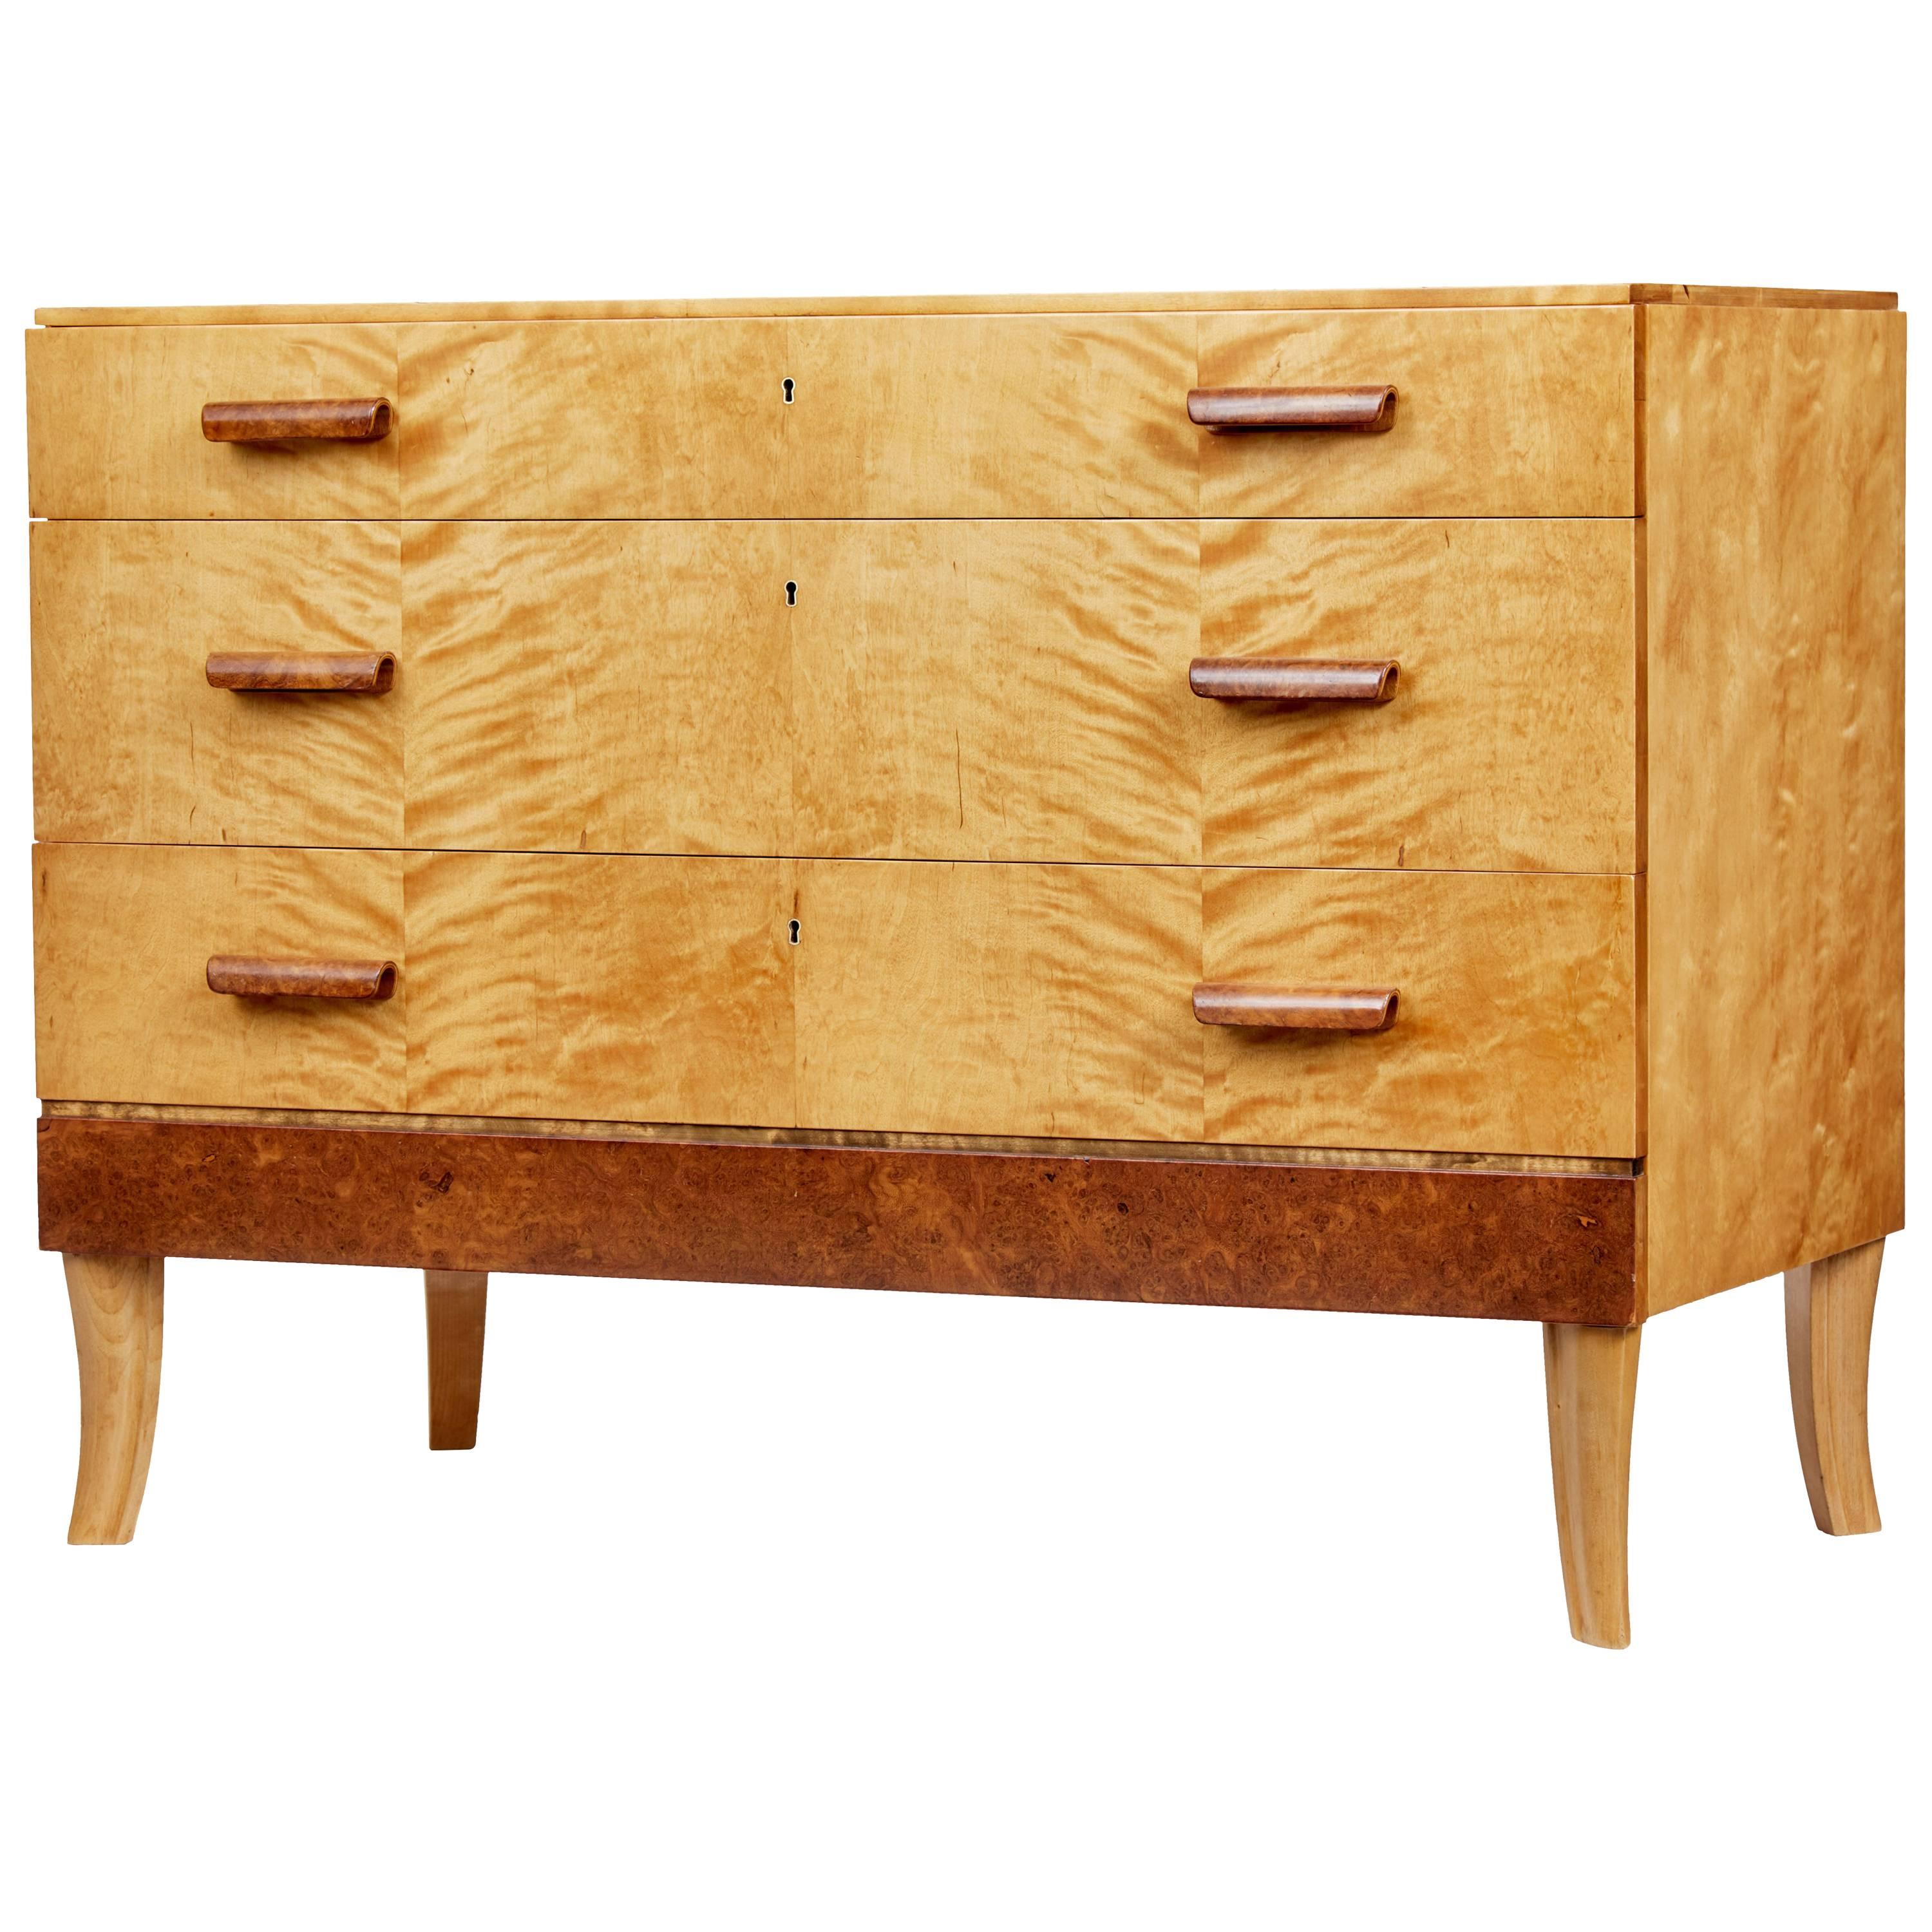 Mid-20th Century Burr and Birch Scandinavian Chest of Drawers